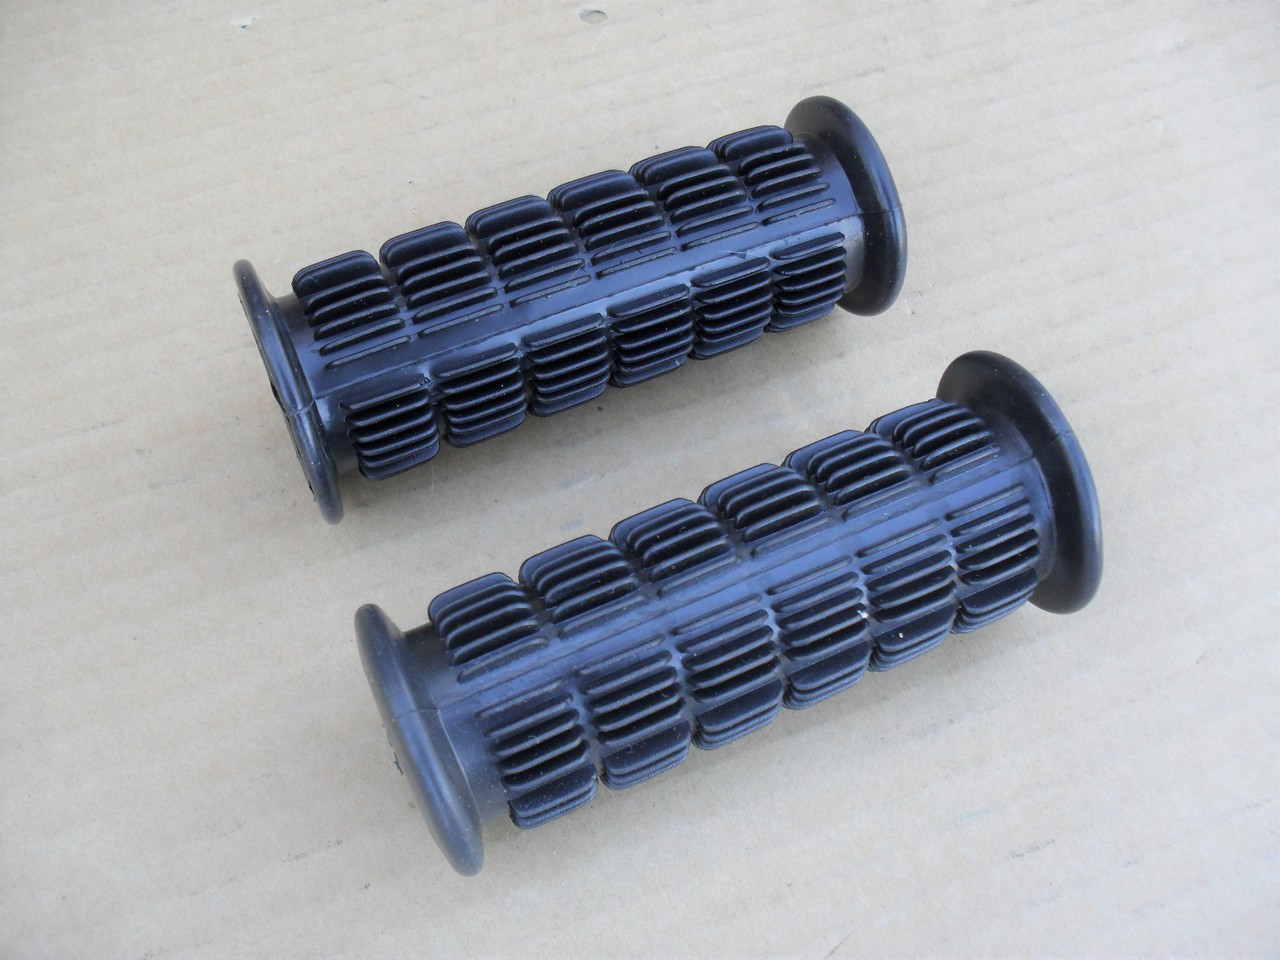 Handle Bar Grips Deluxe 1" Rubber Lawn Mower 2348 Grip Set of 2